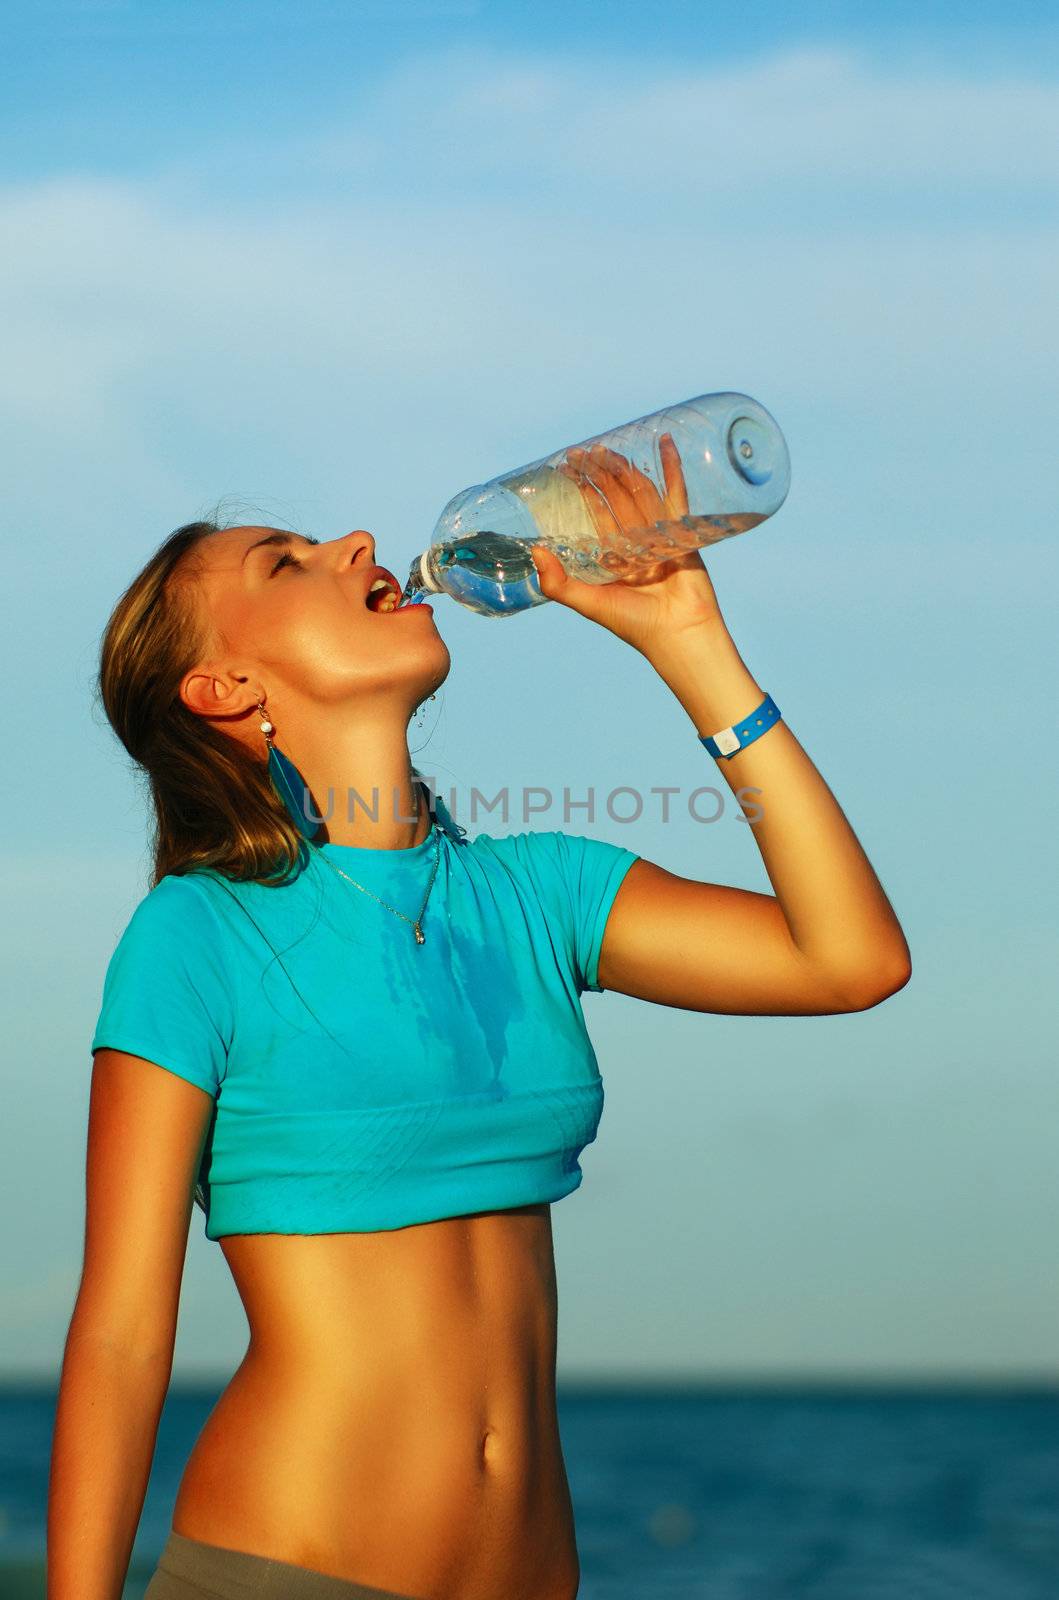 Drinking water after jogging by haveseen